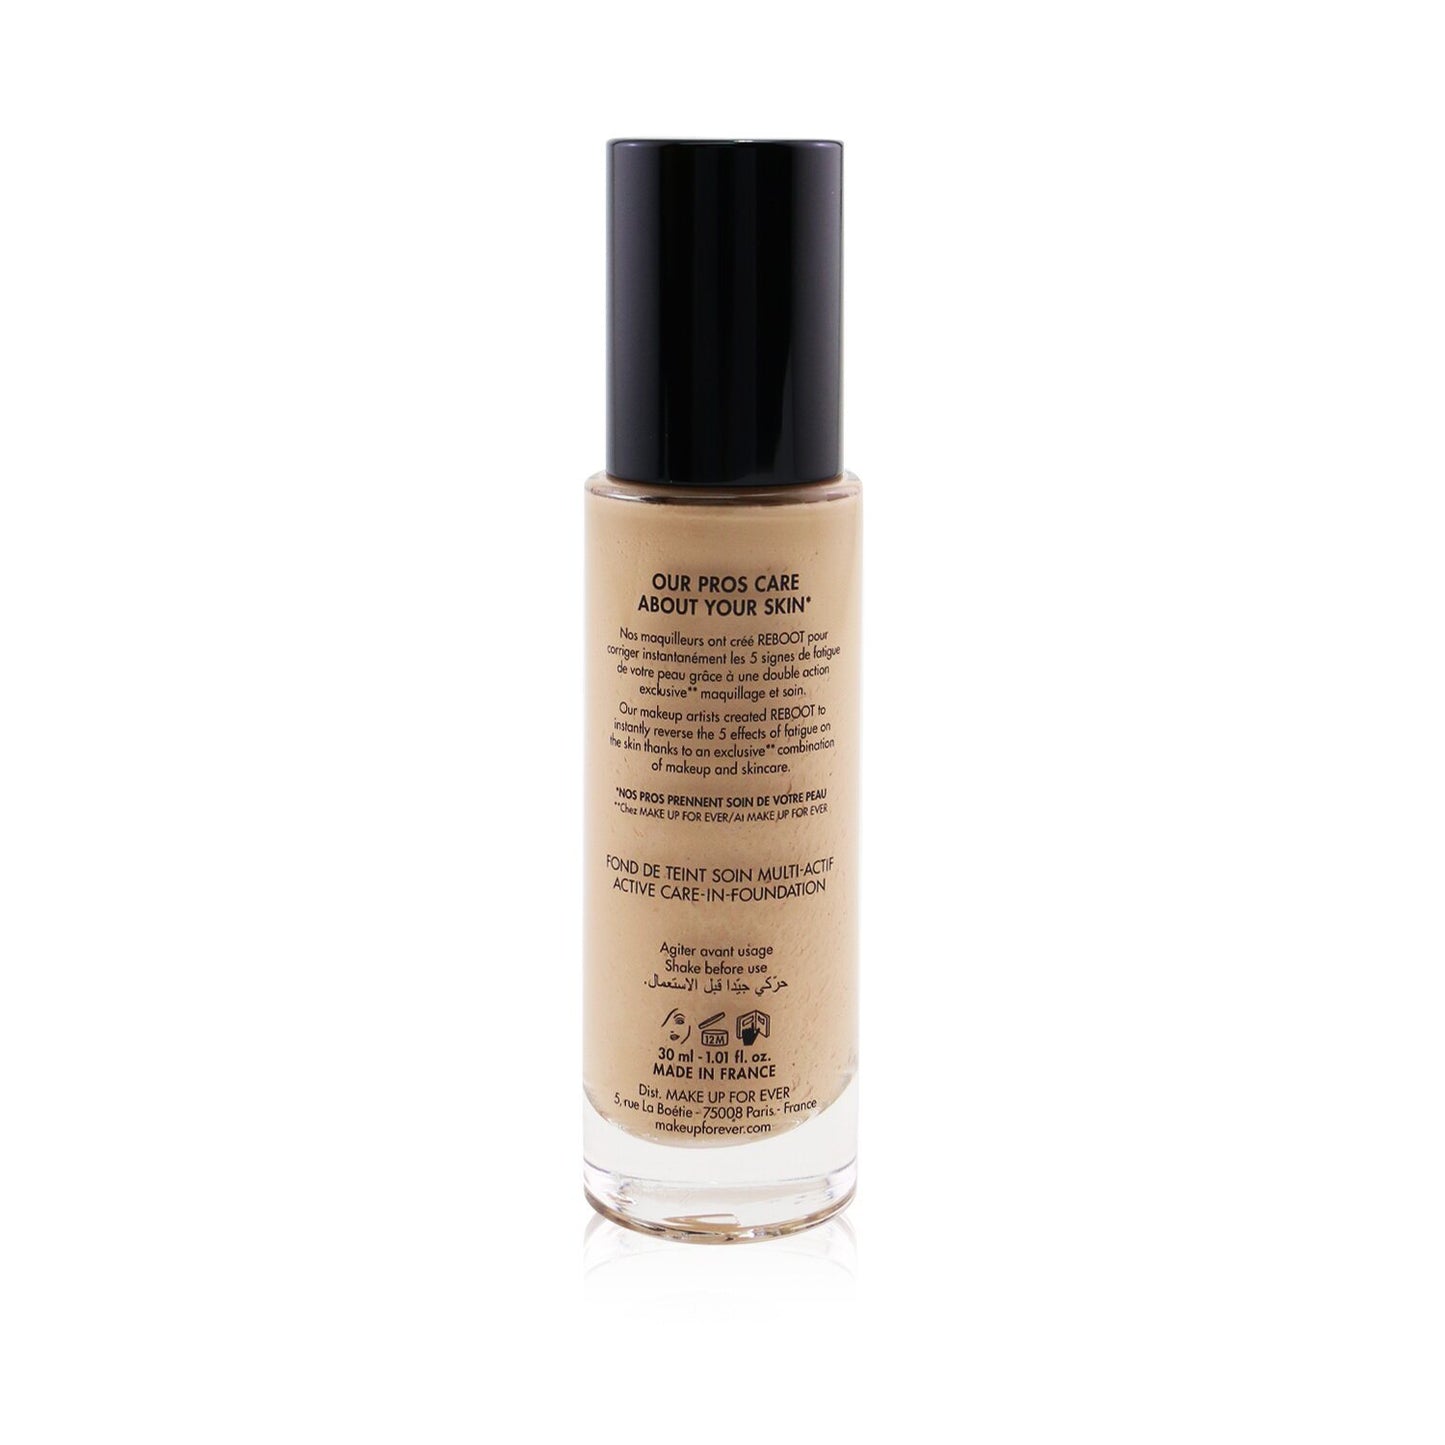 MAKE UP FOR EVER - Reboot Active Care In Foundation - # R250 Nude Beige 145367 30ml/1.01oz